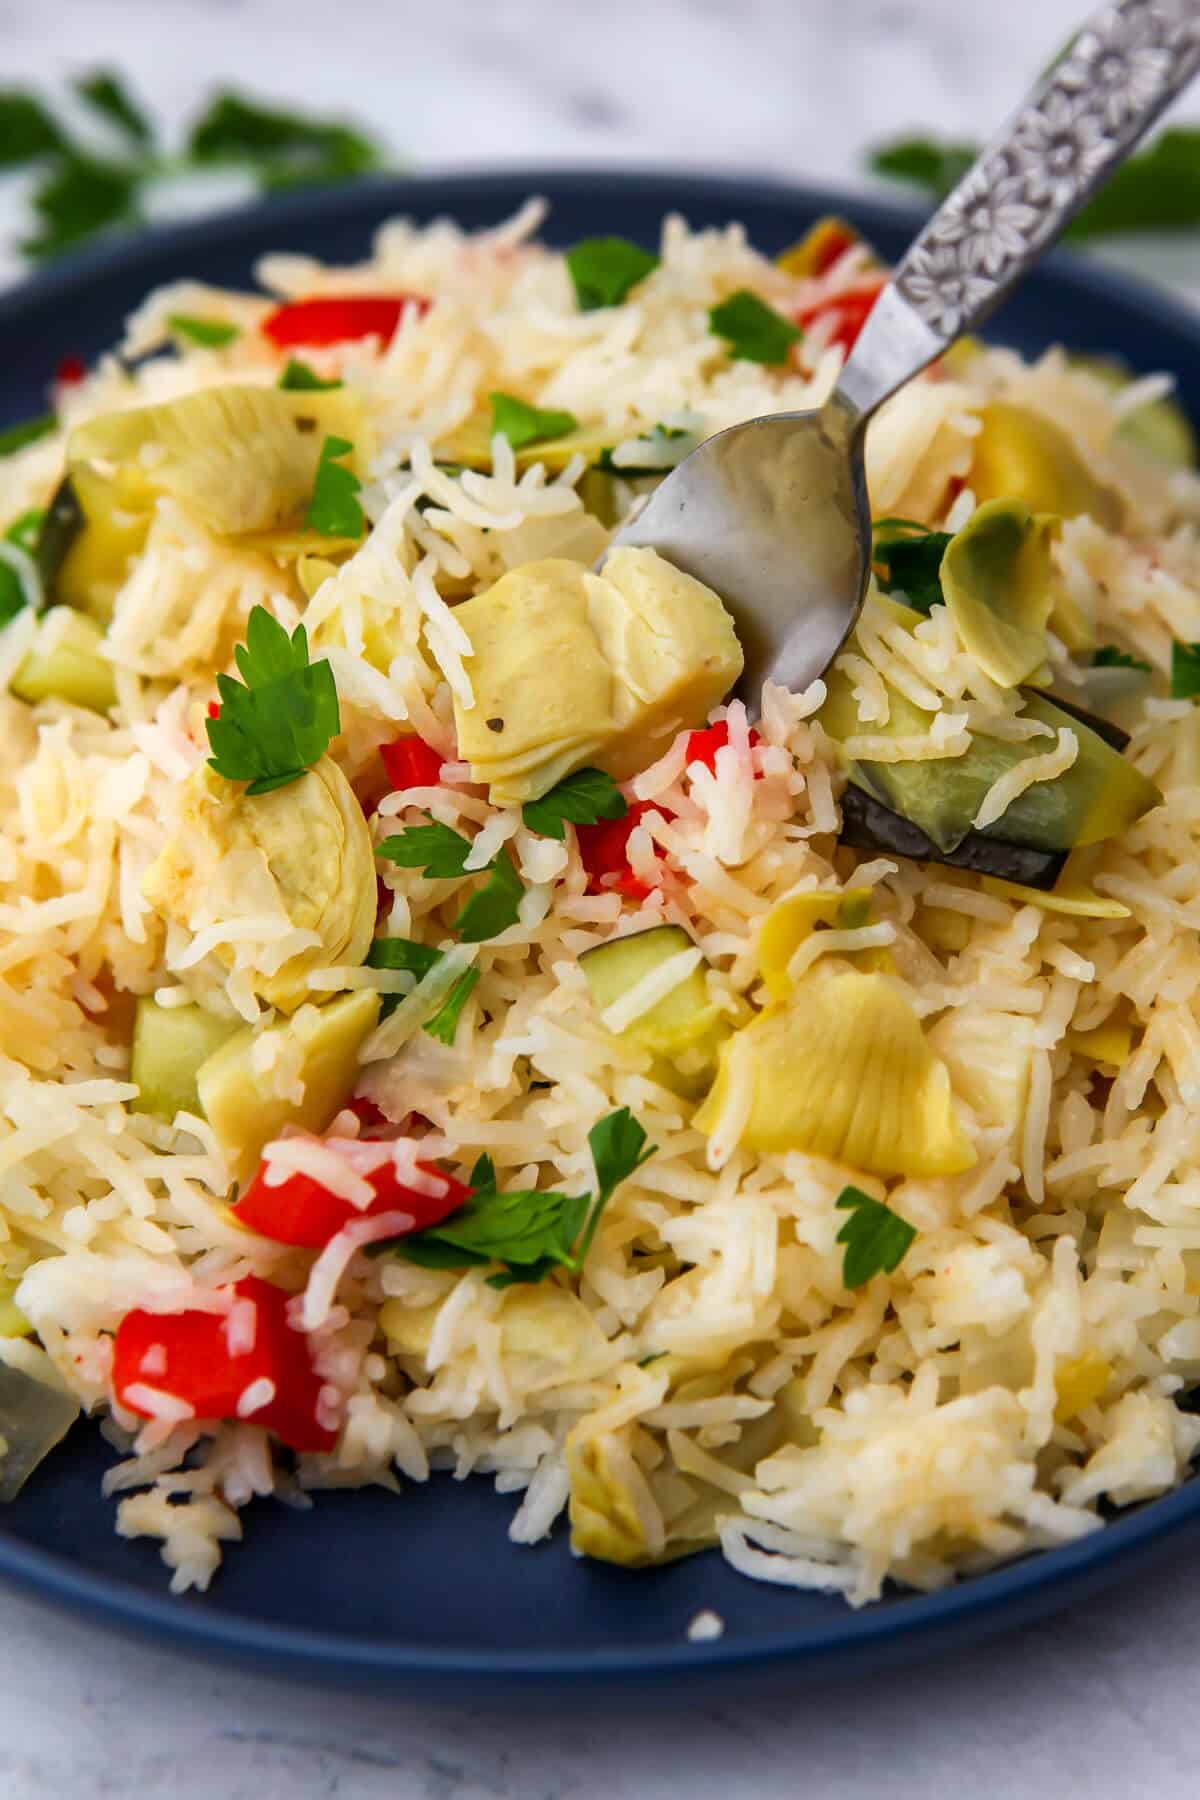 A blue plate filled with vegan rice pilaf made with onions, zucchini, bell pepper, and artichokes.